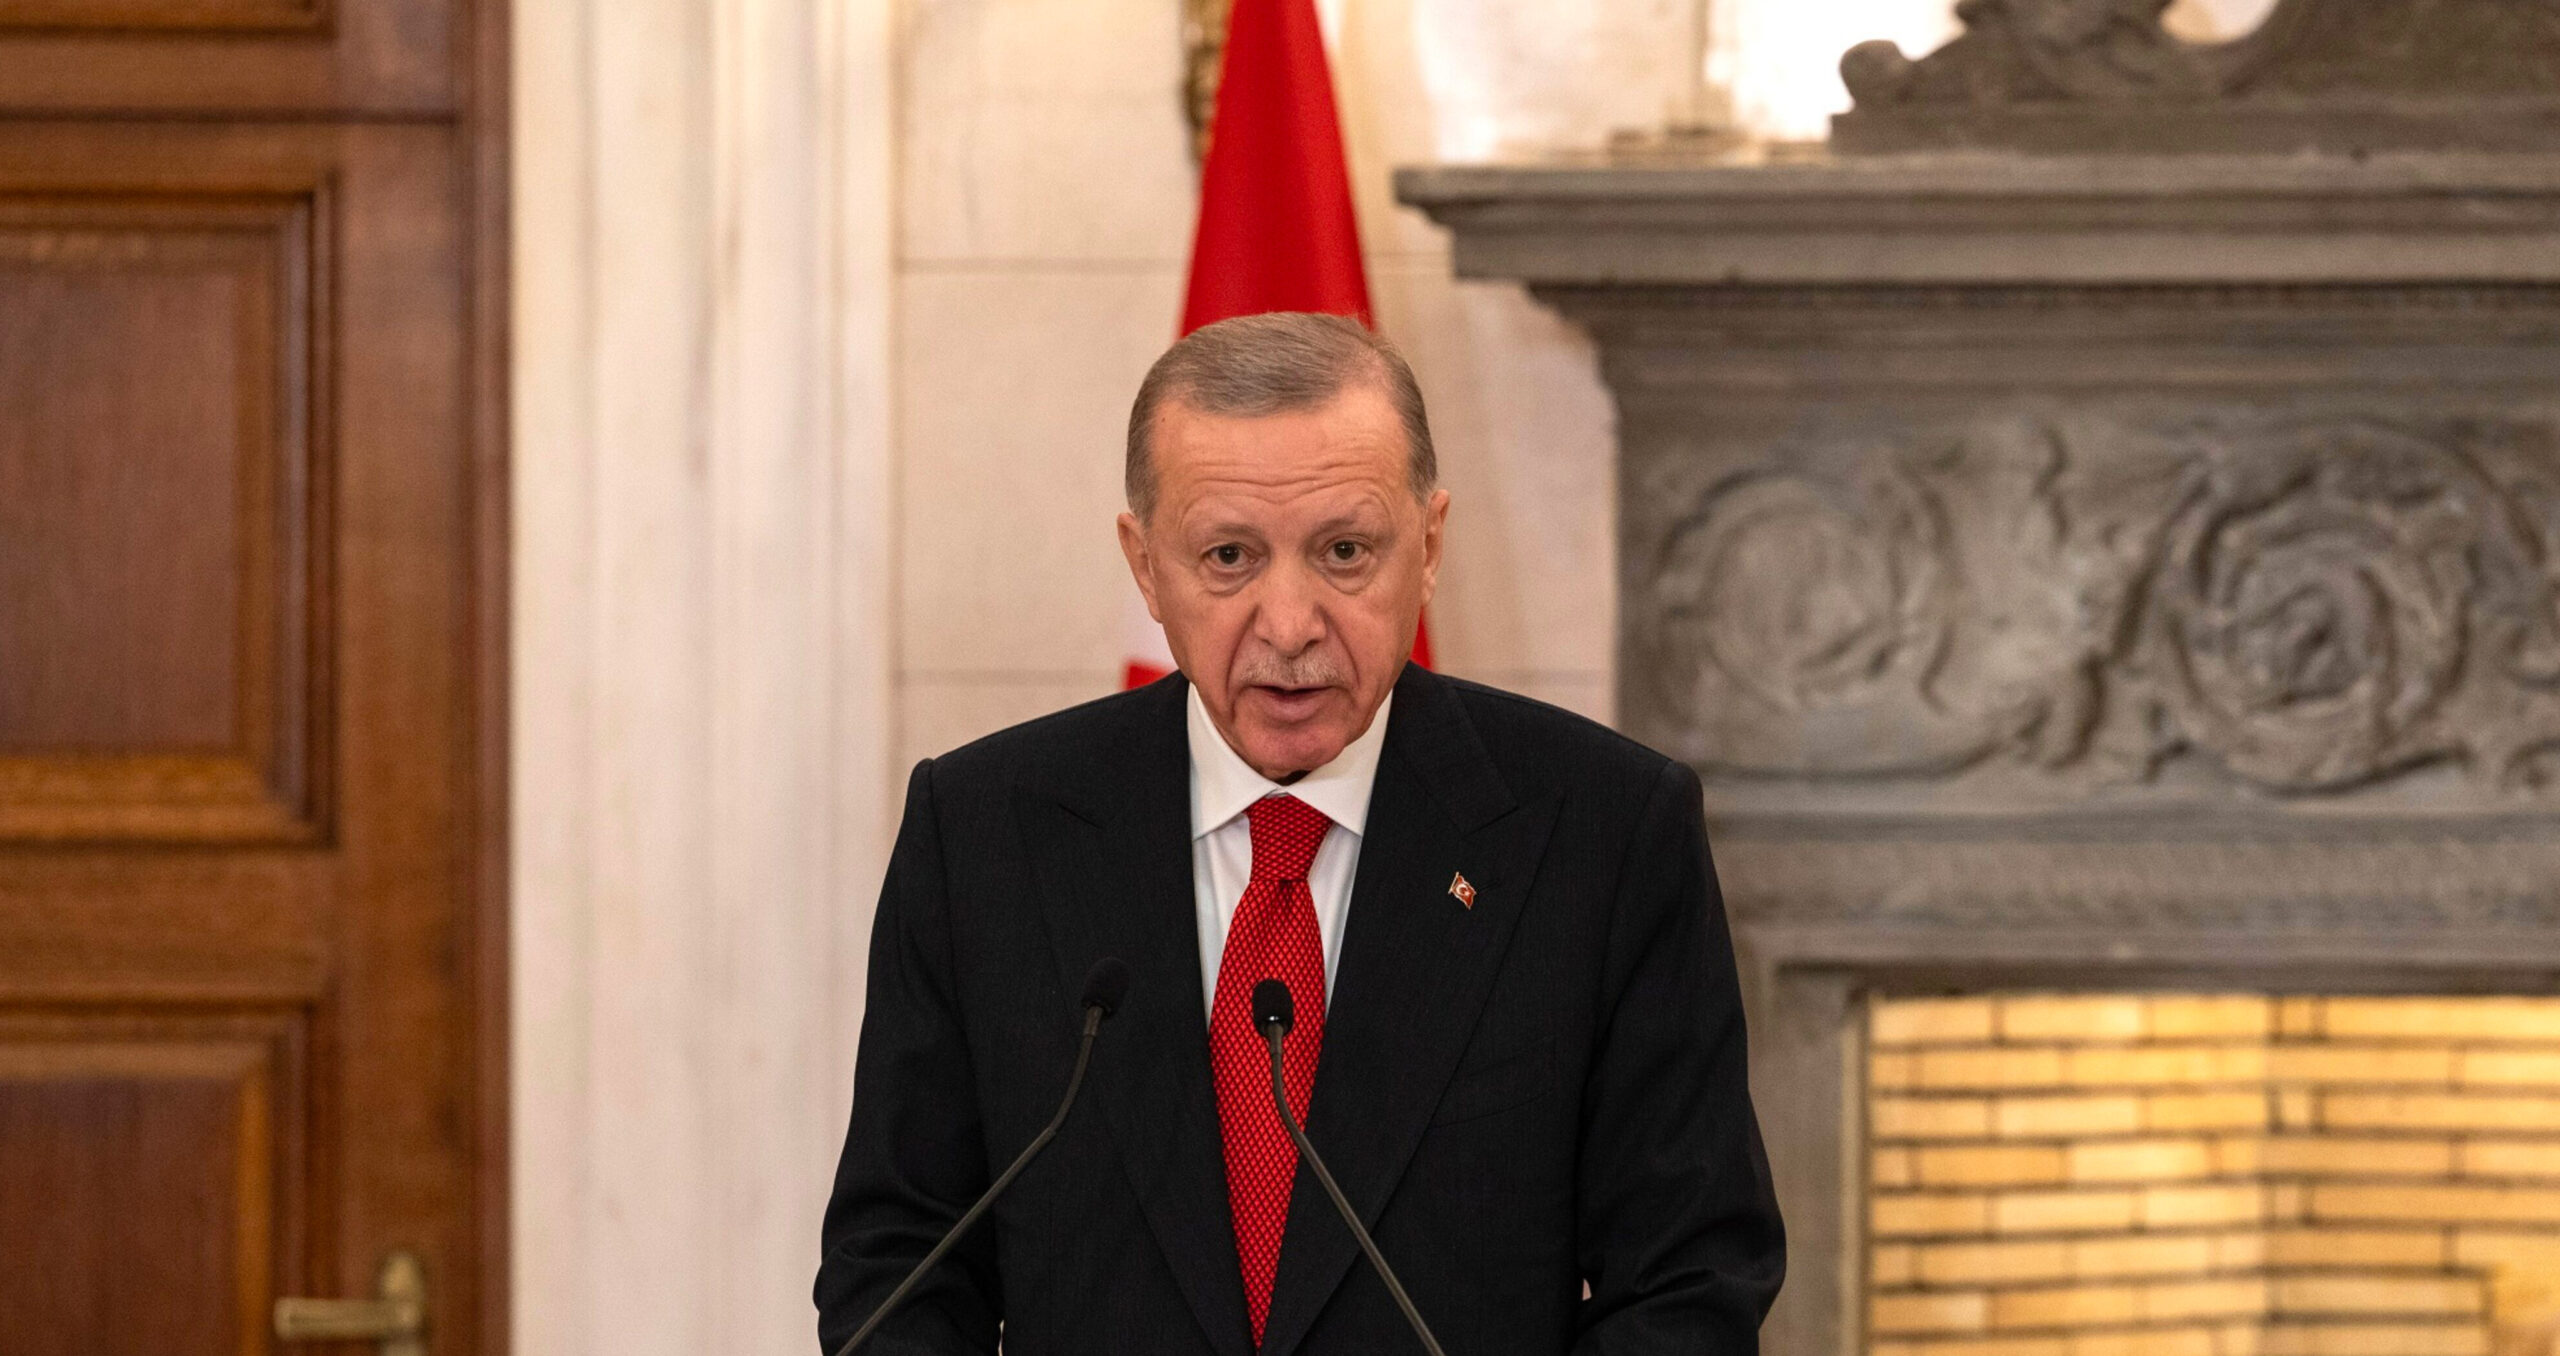 Turkey’s president, Recep Tayyip Erdogan, introduced several popular measures shortly before last year’s elections, such as raising public sector wages and free natural gas for households for one year. Afterwards, he reinstated orthodox monetary and fiscal policies (Photo: Yorgos Karahalis/Bloomberg) 